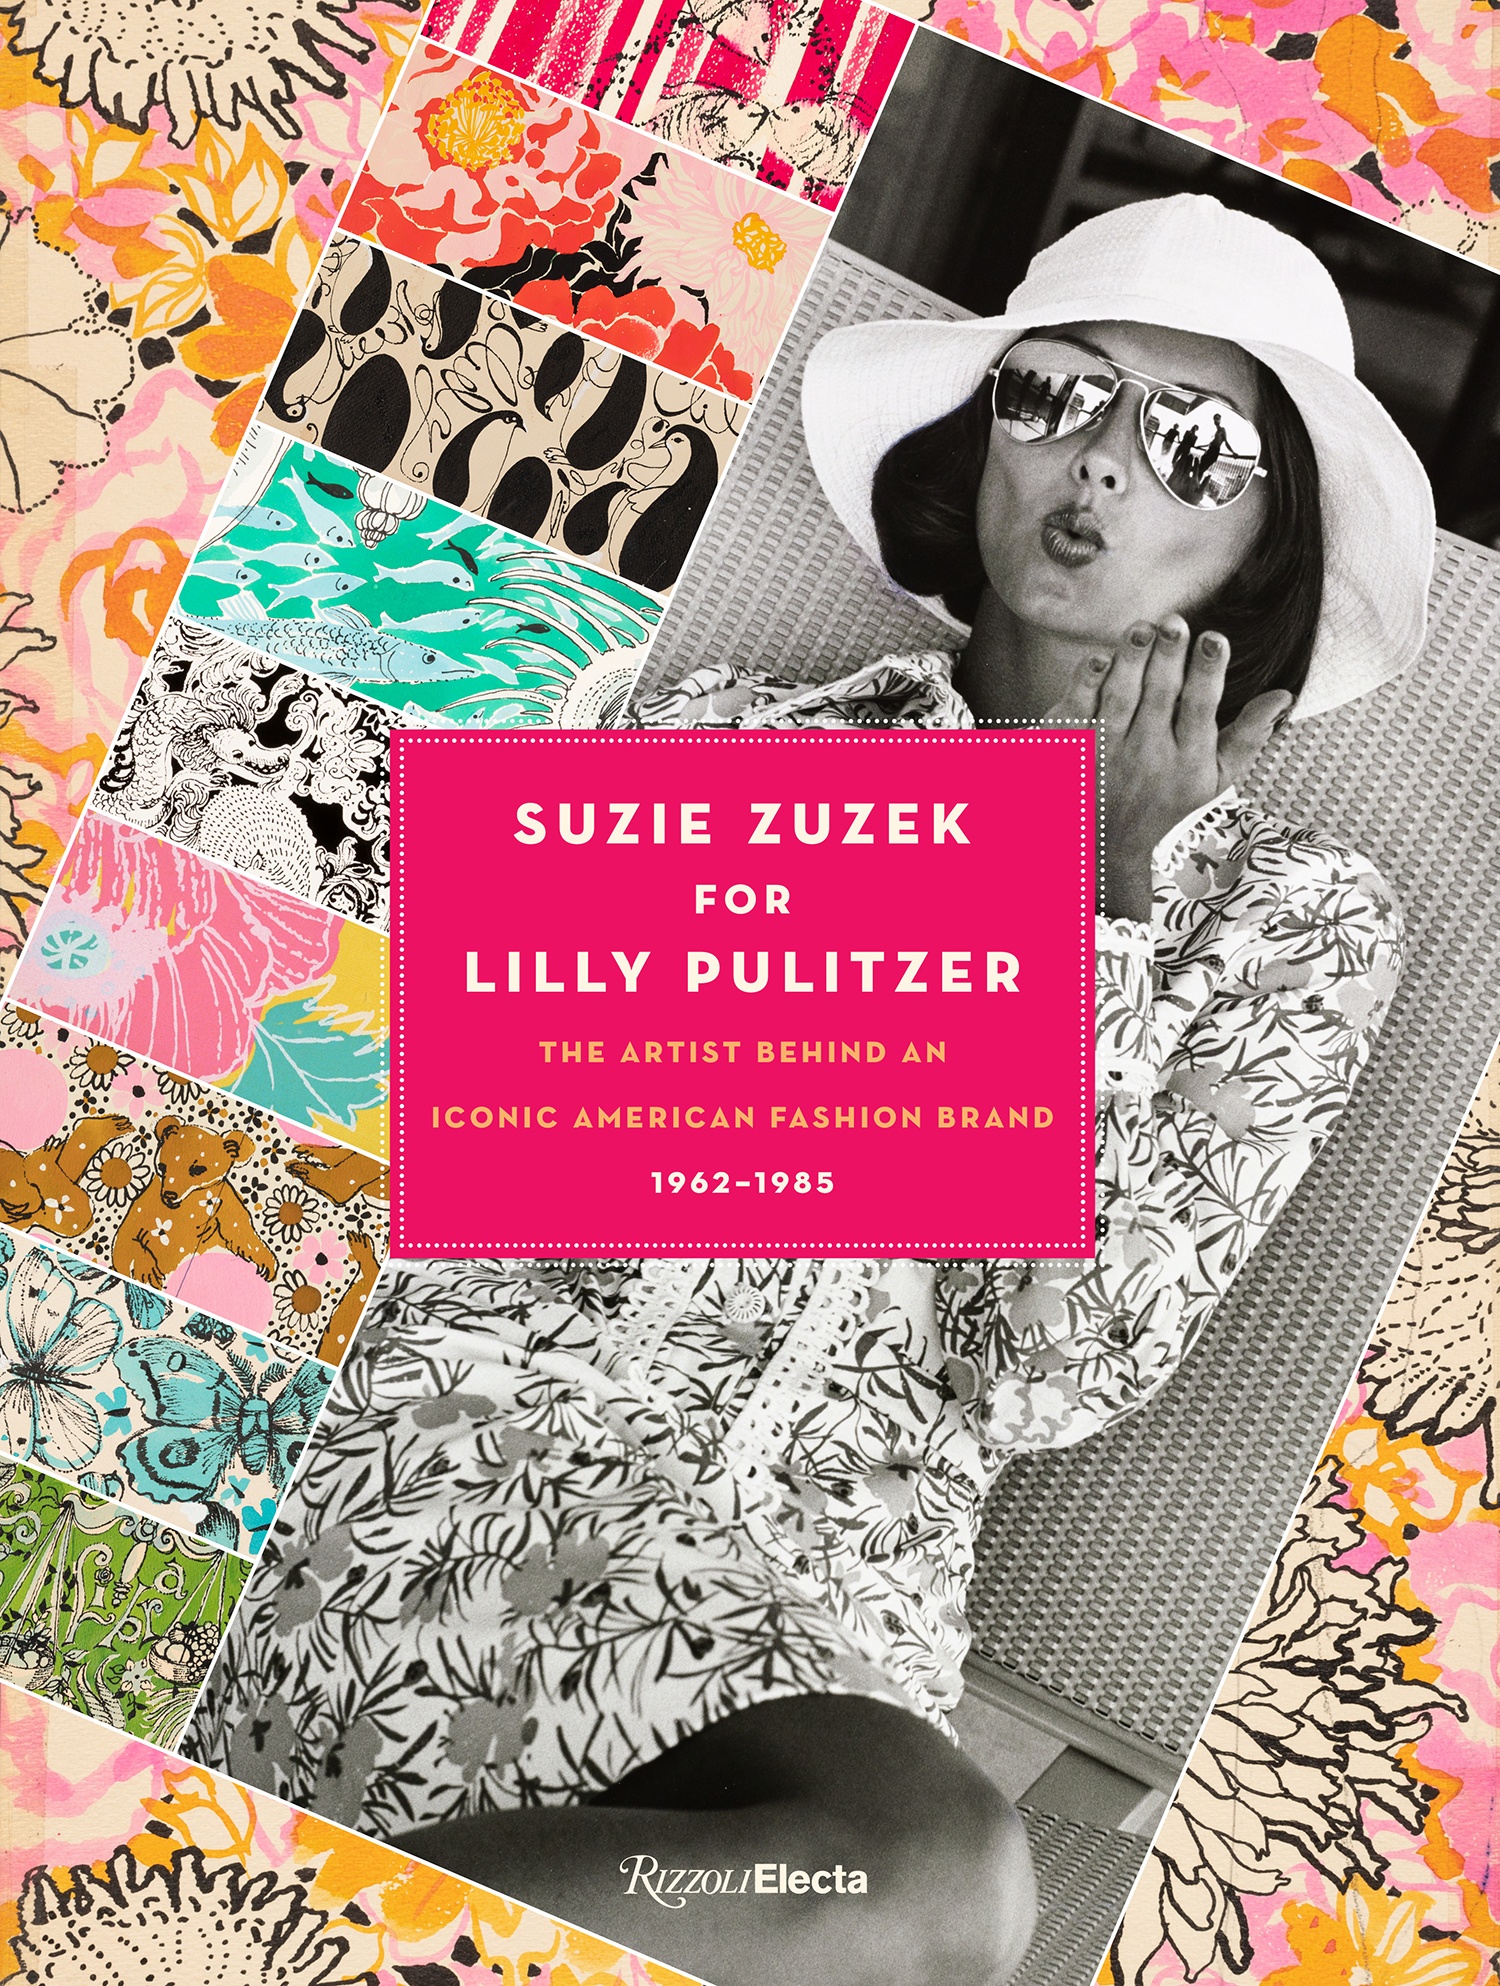 The cover of Suzie Zuzek for Lilly Pulitzer: The Artist Behind an Iconic American Fashion Brand 1962-1985 (Rizzoli).